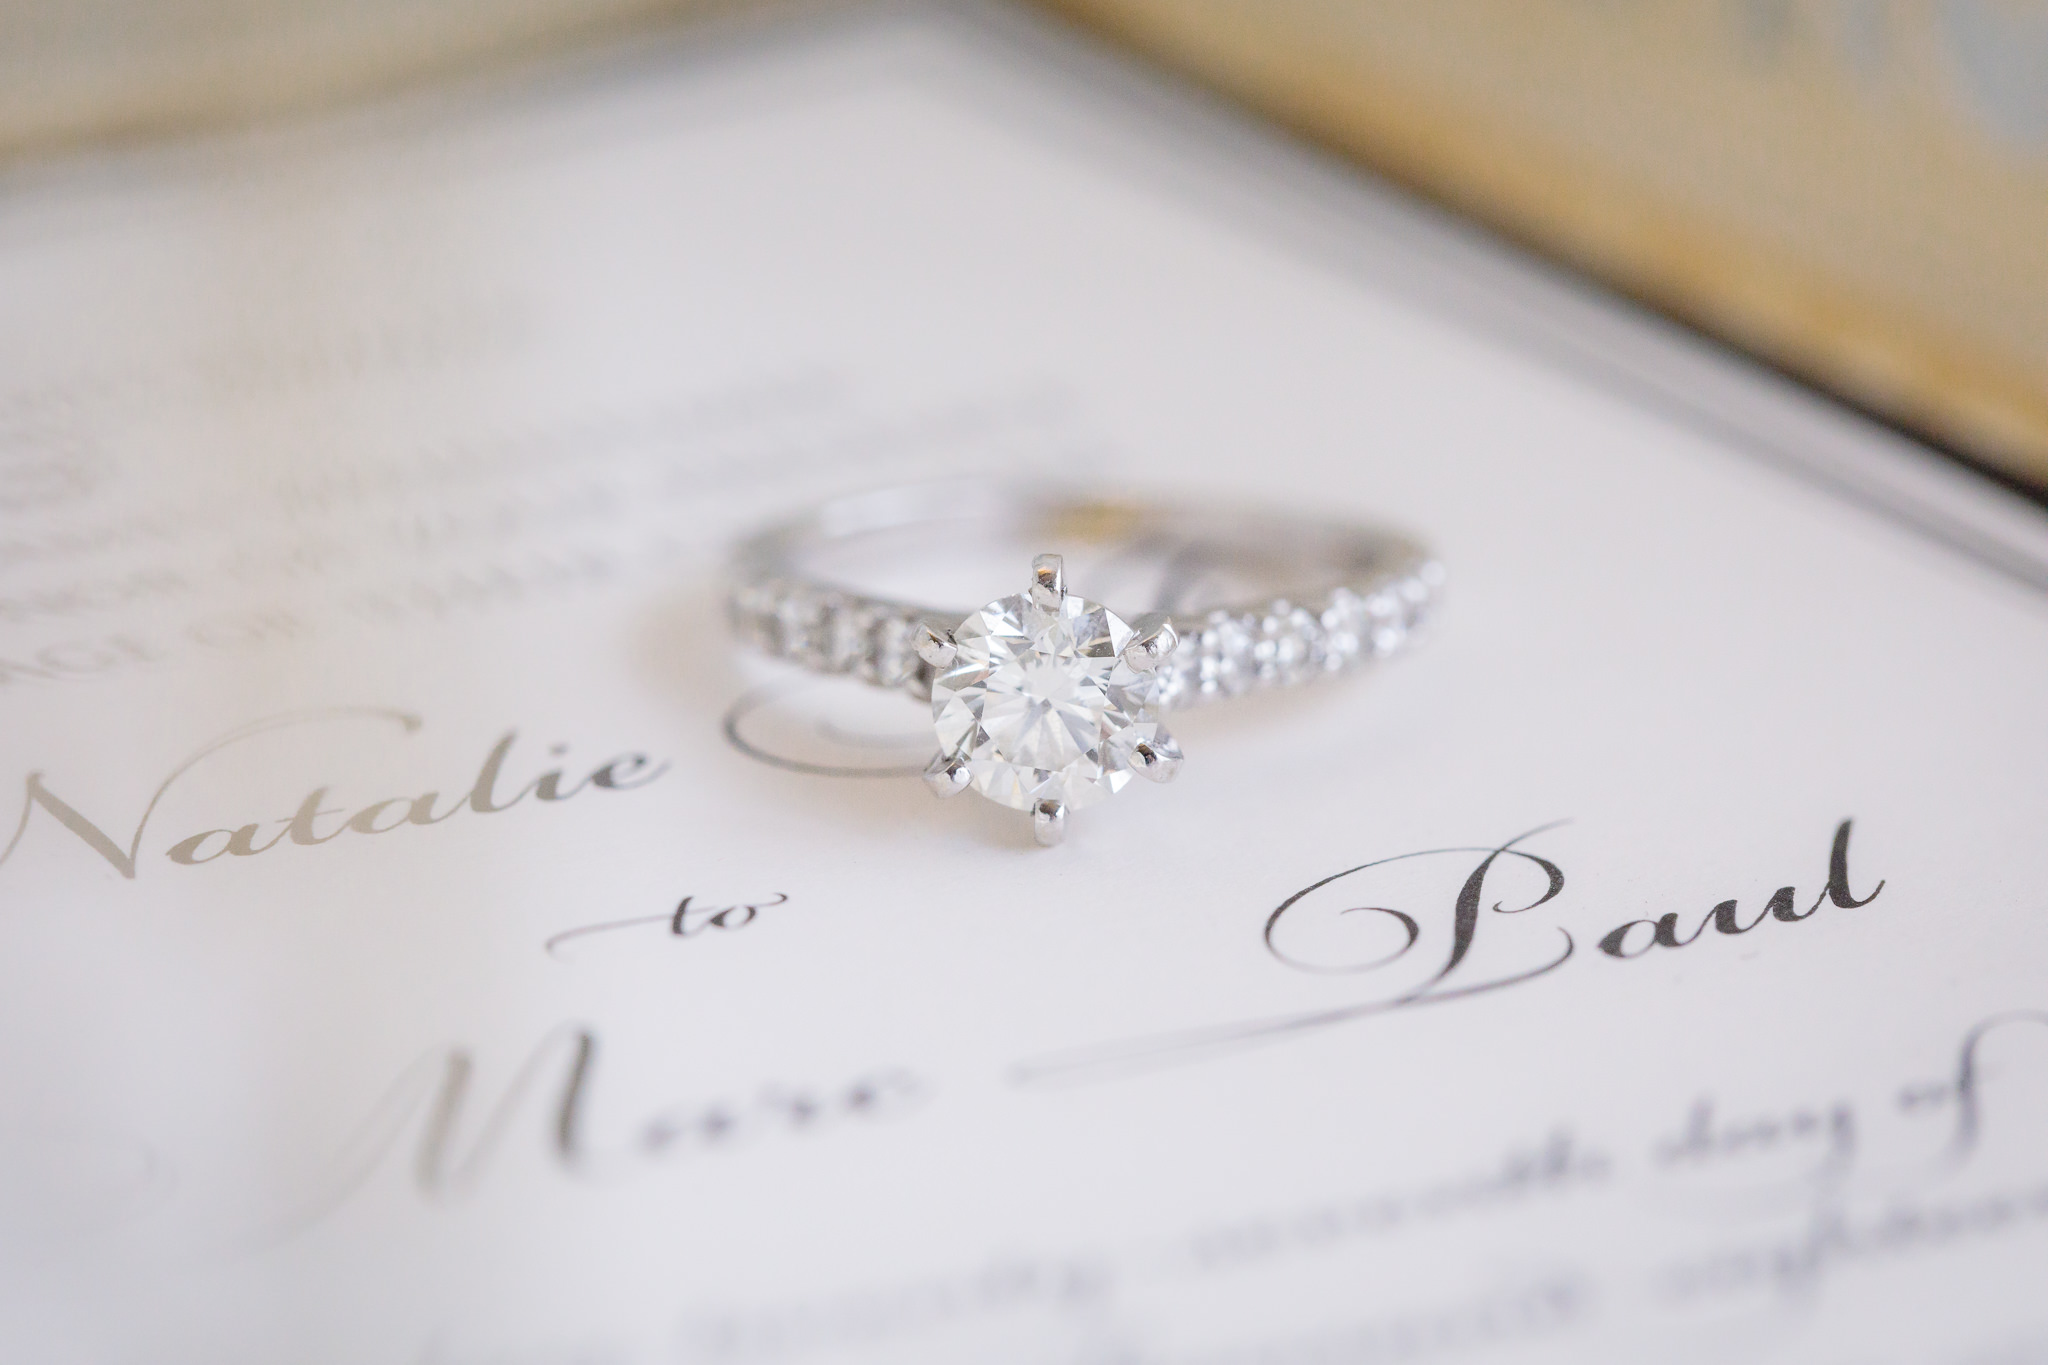 Solitary diamond engagement ring rests on a wedding invitation by Hello Beautiful Designs